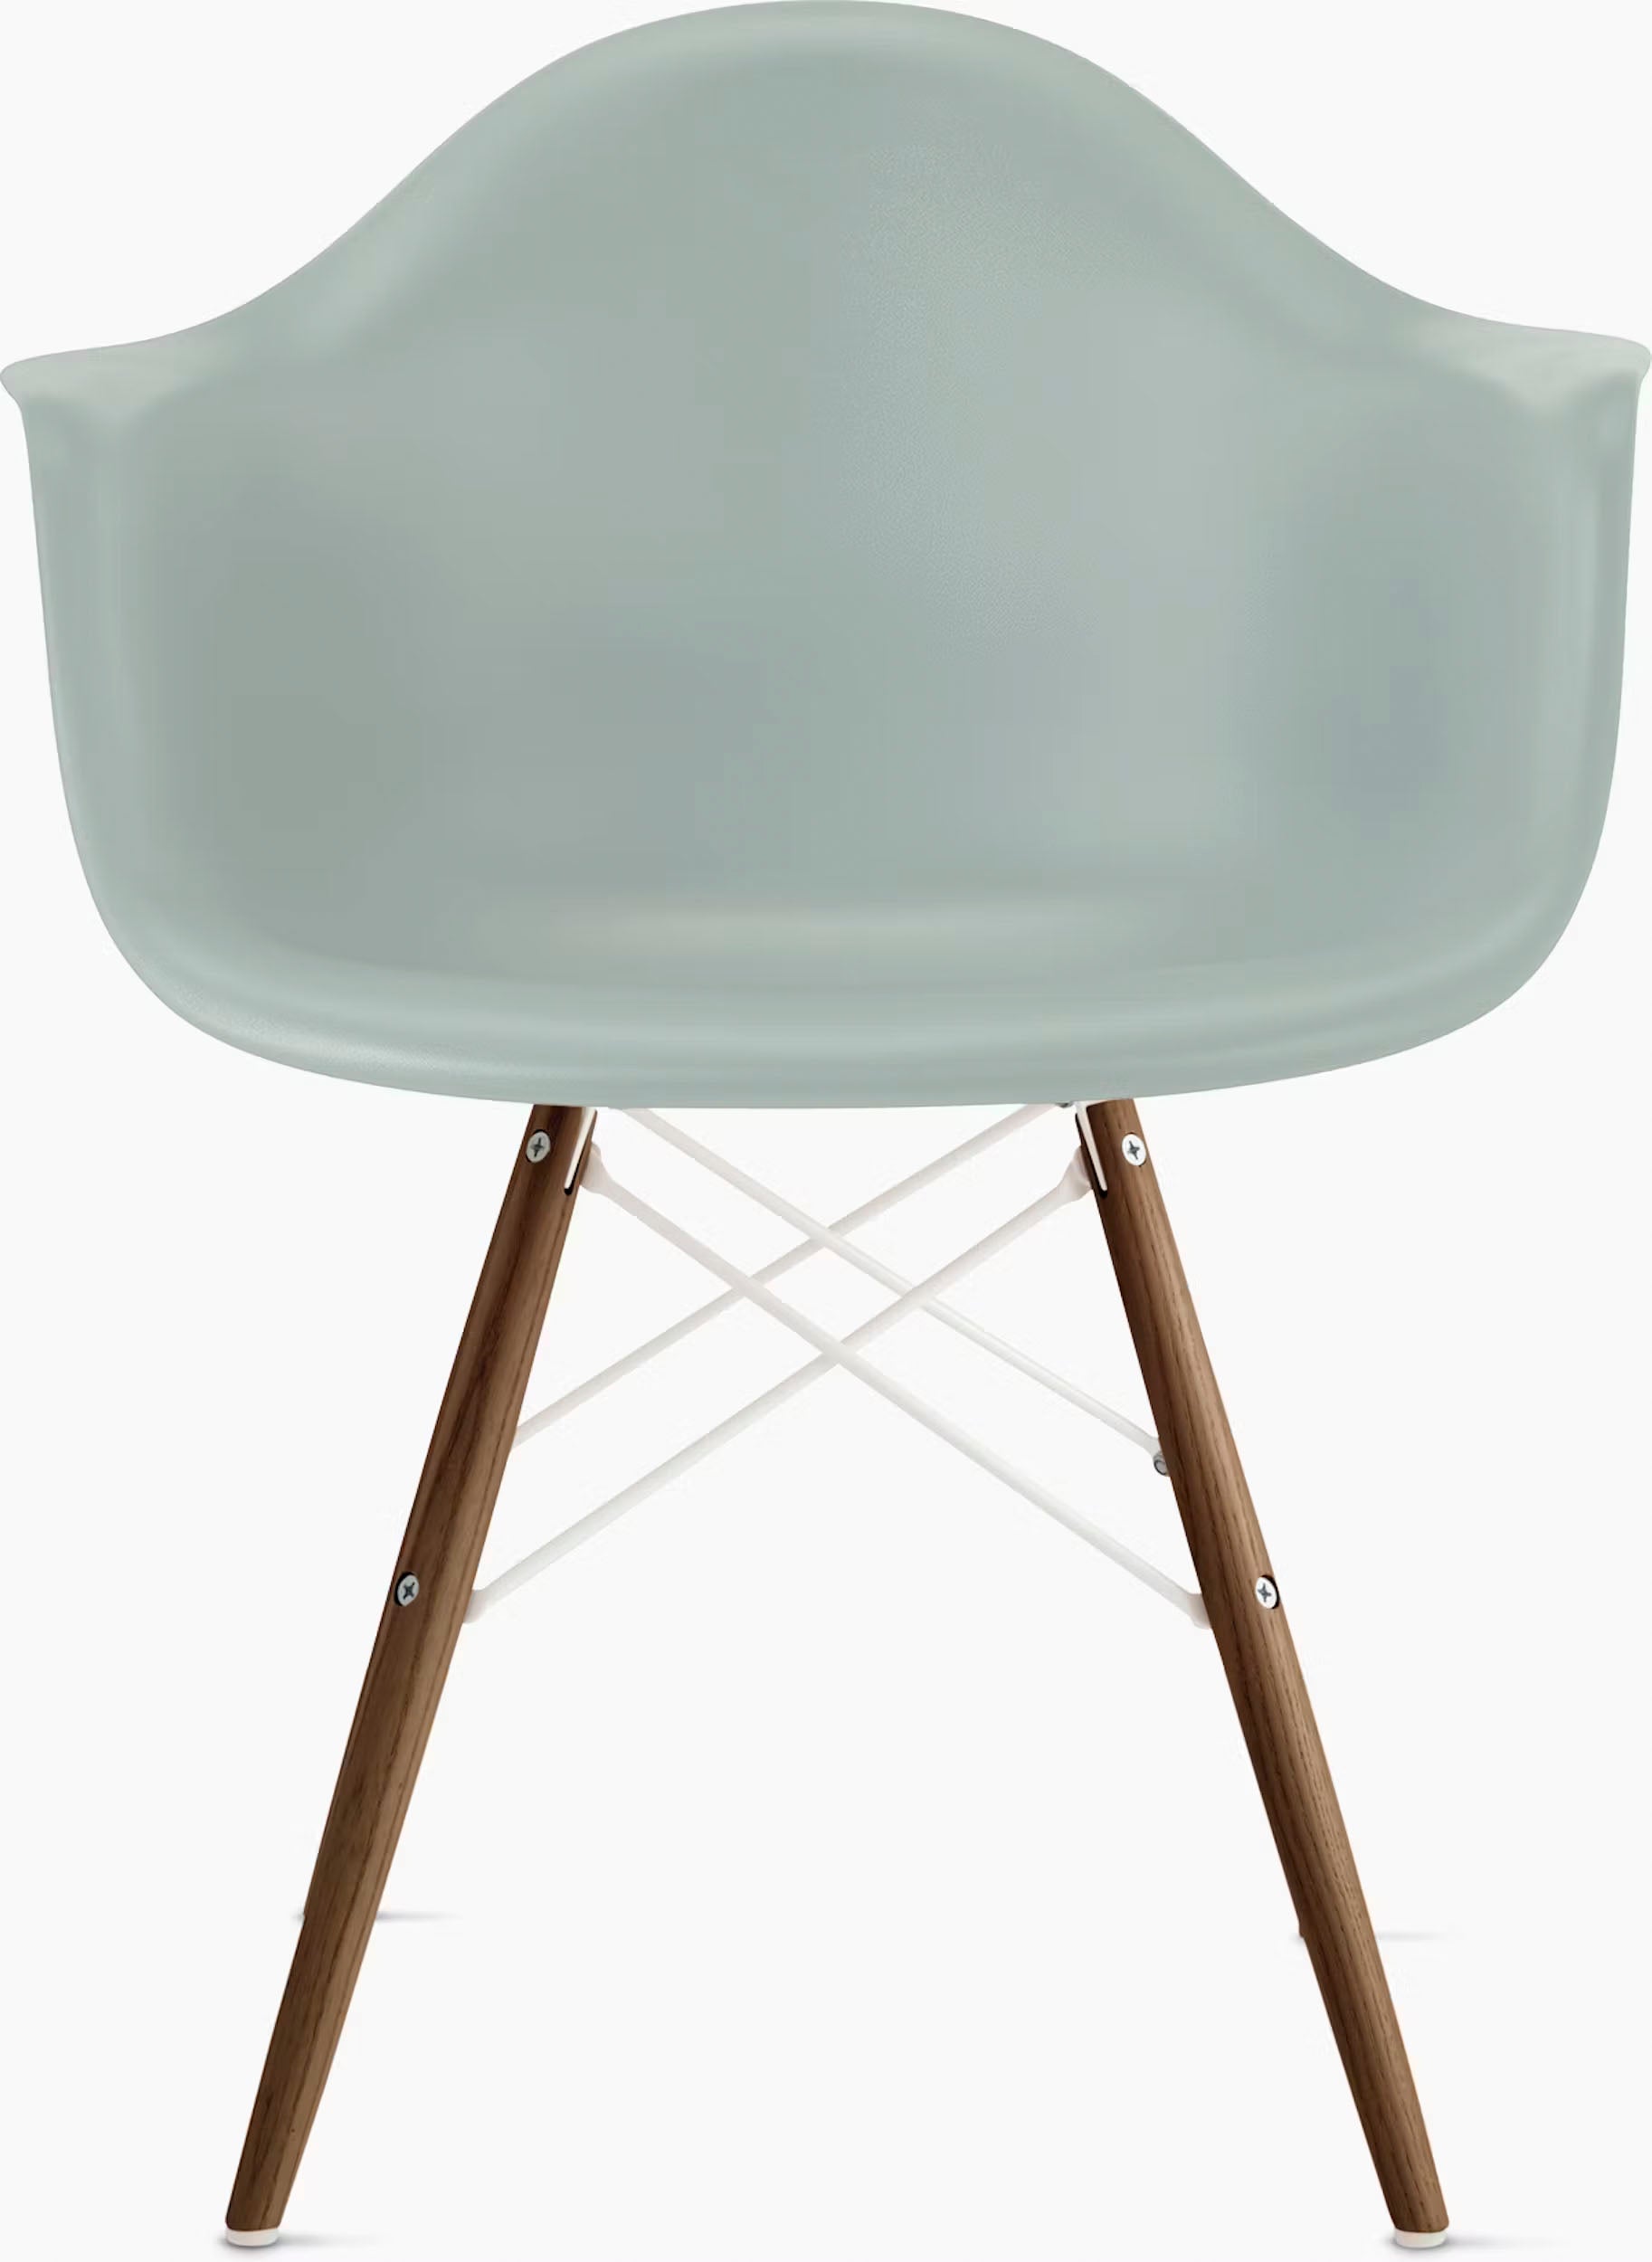 Herman Miller Eames Molded Shell Chair, Grey Green - Preowned